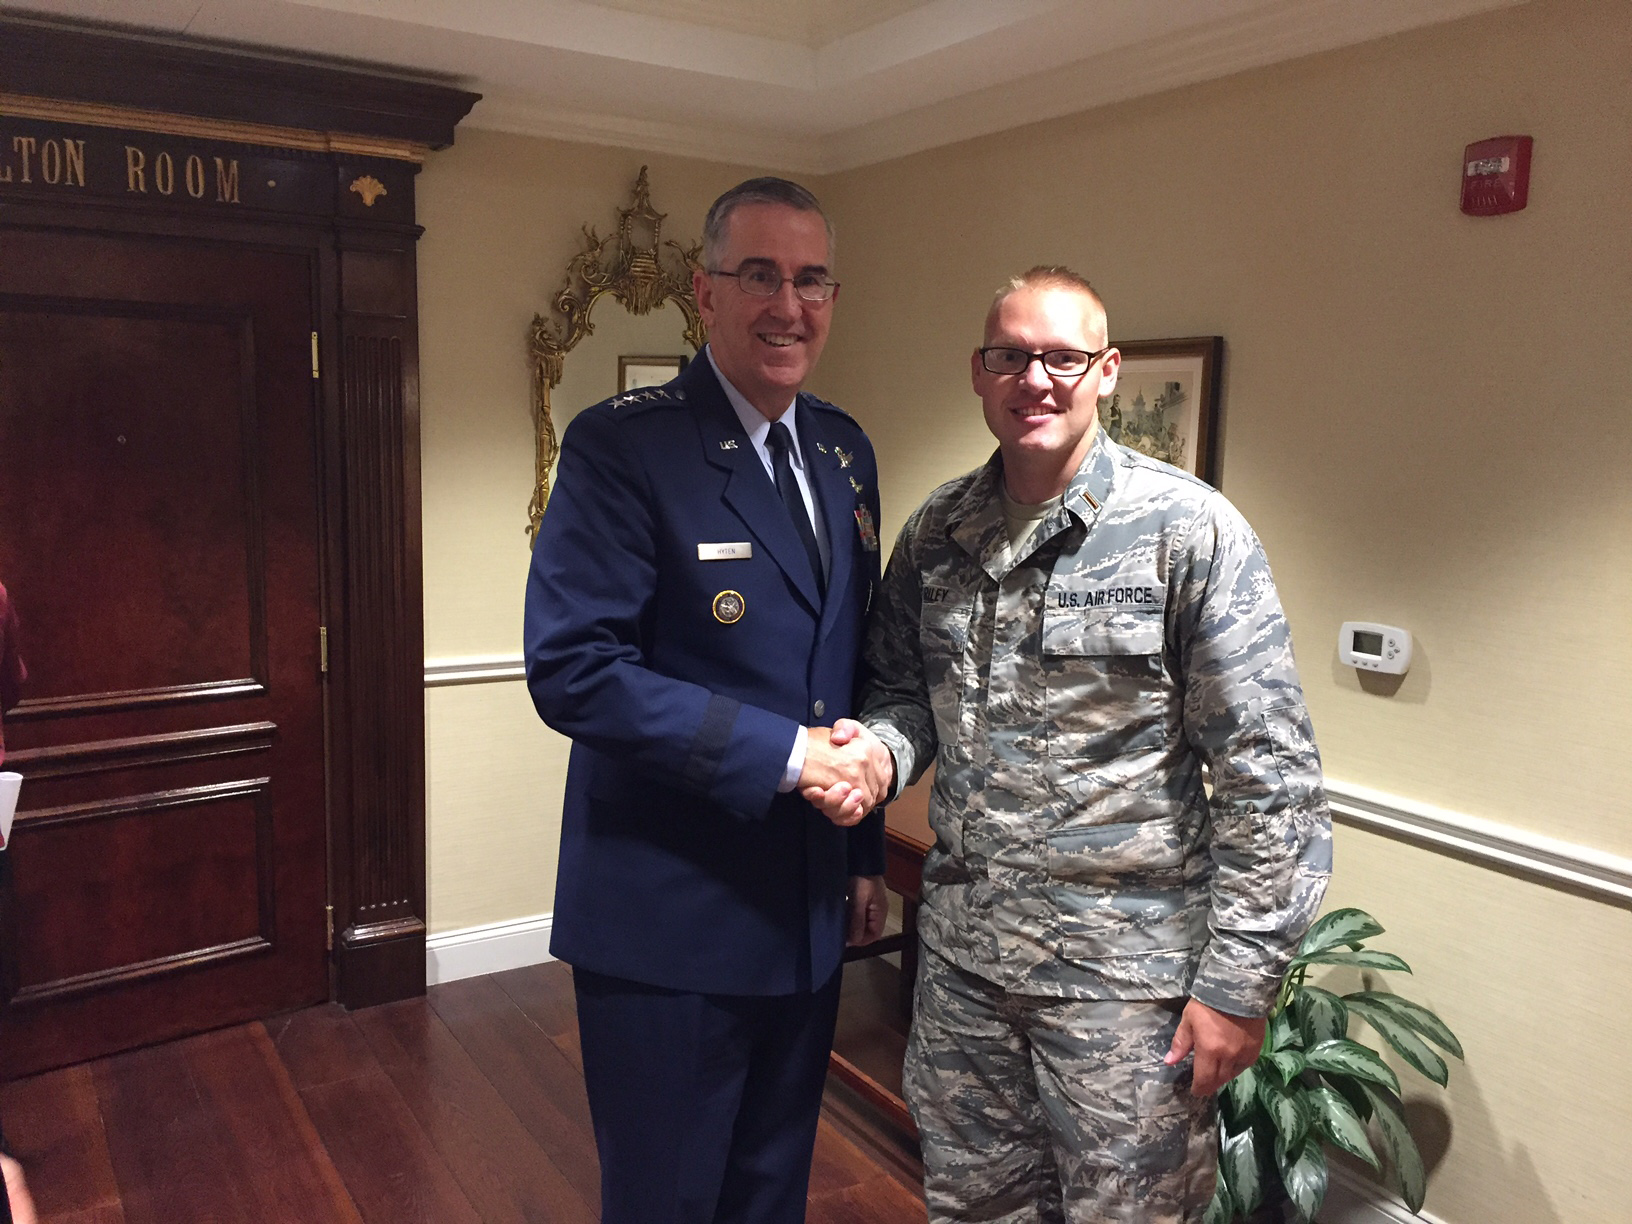 General shaking hands with a new recruit.